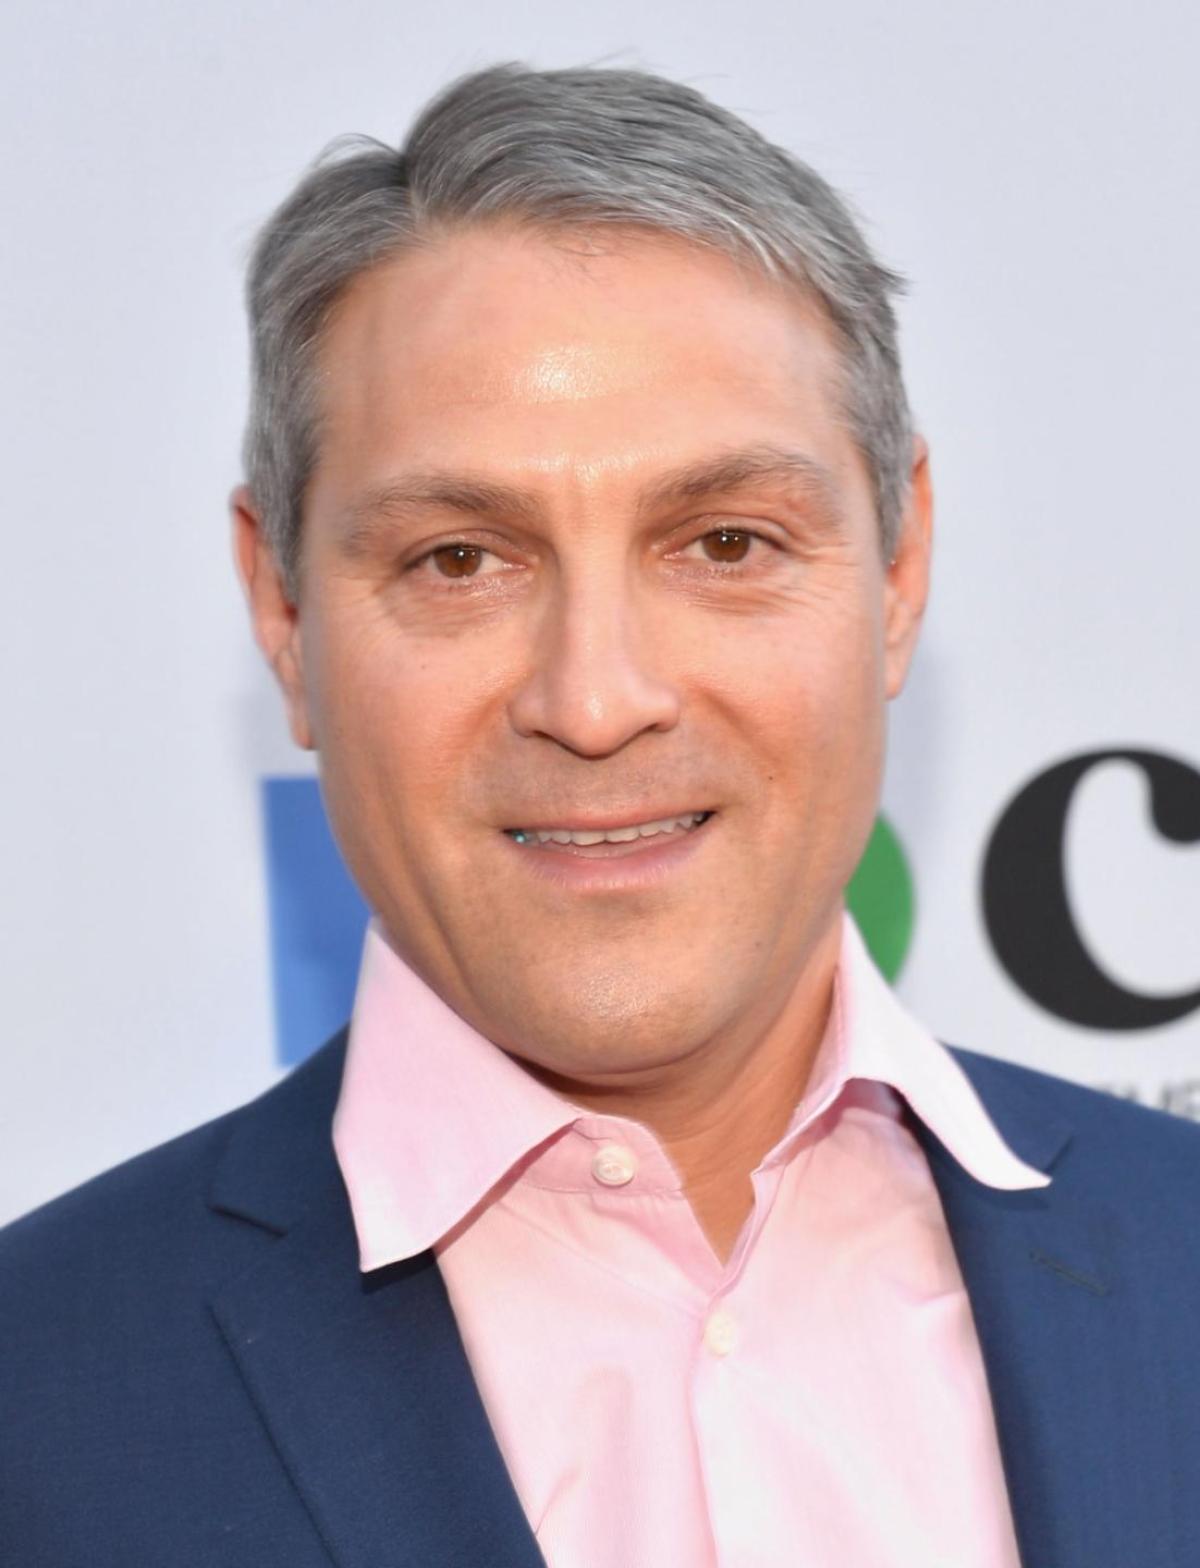  Ari Emanuel’s representation firm will expand into sports with the addition of IMG. 